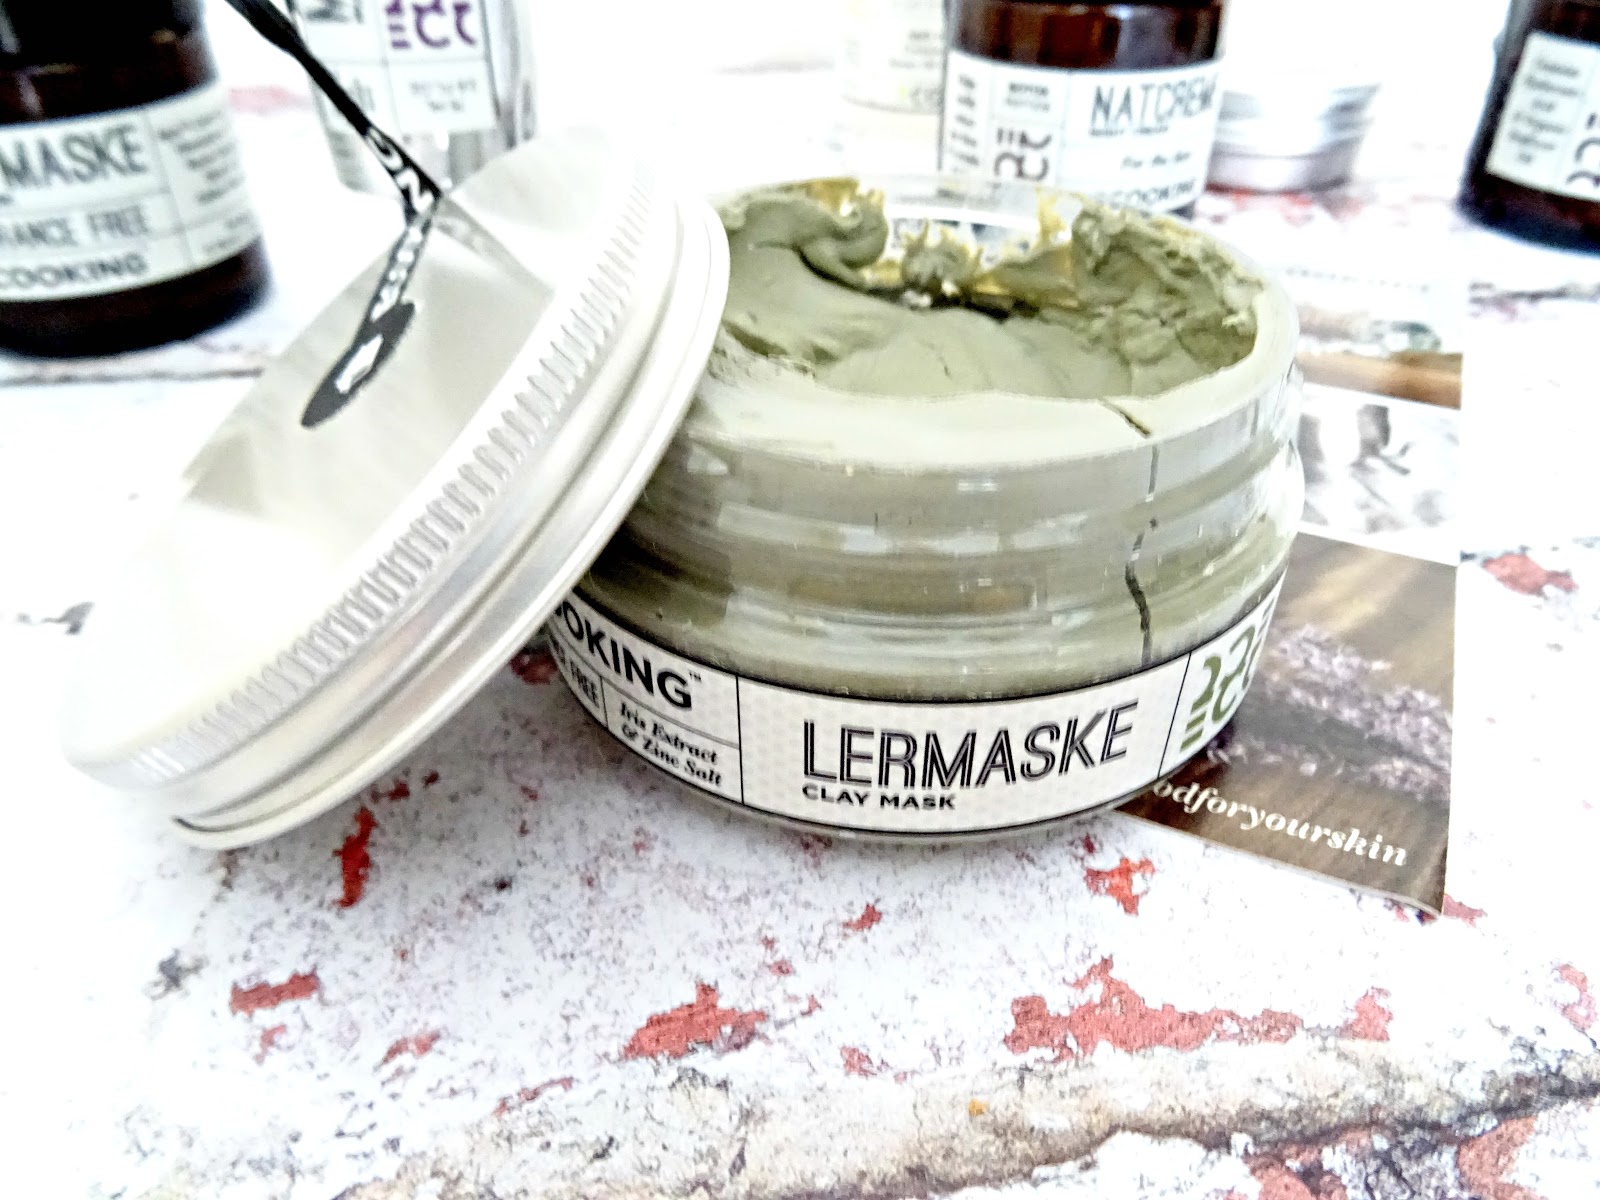 Beautyqueenuk A UK Beauty and Lifestyle Blog: ECooking - The Danish Skincare Brand